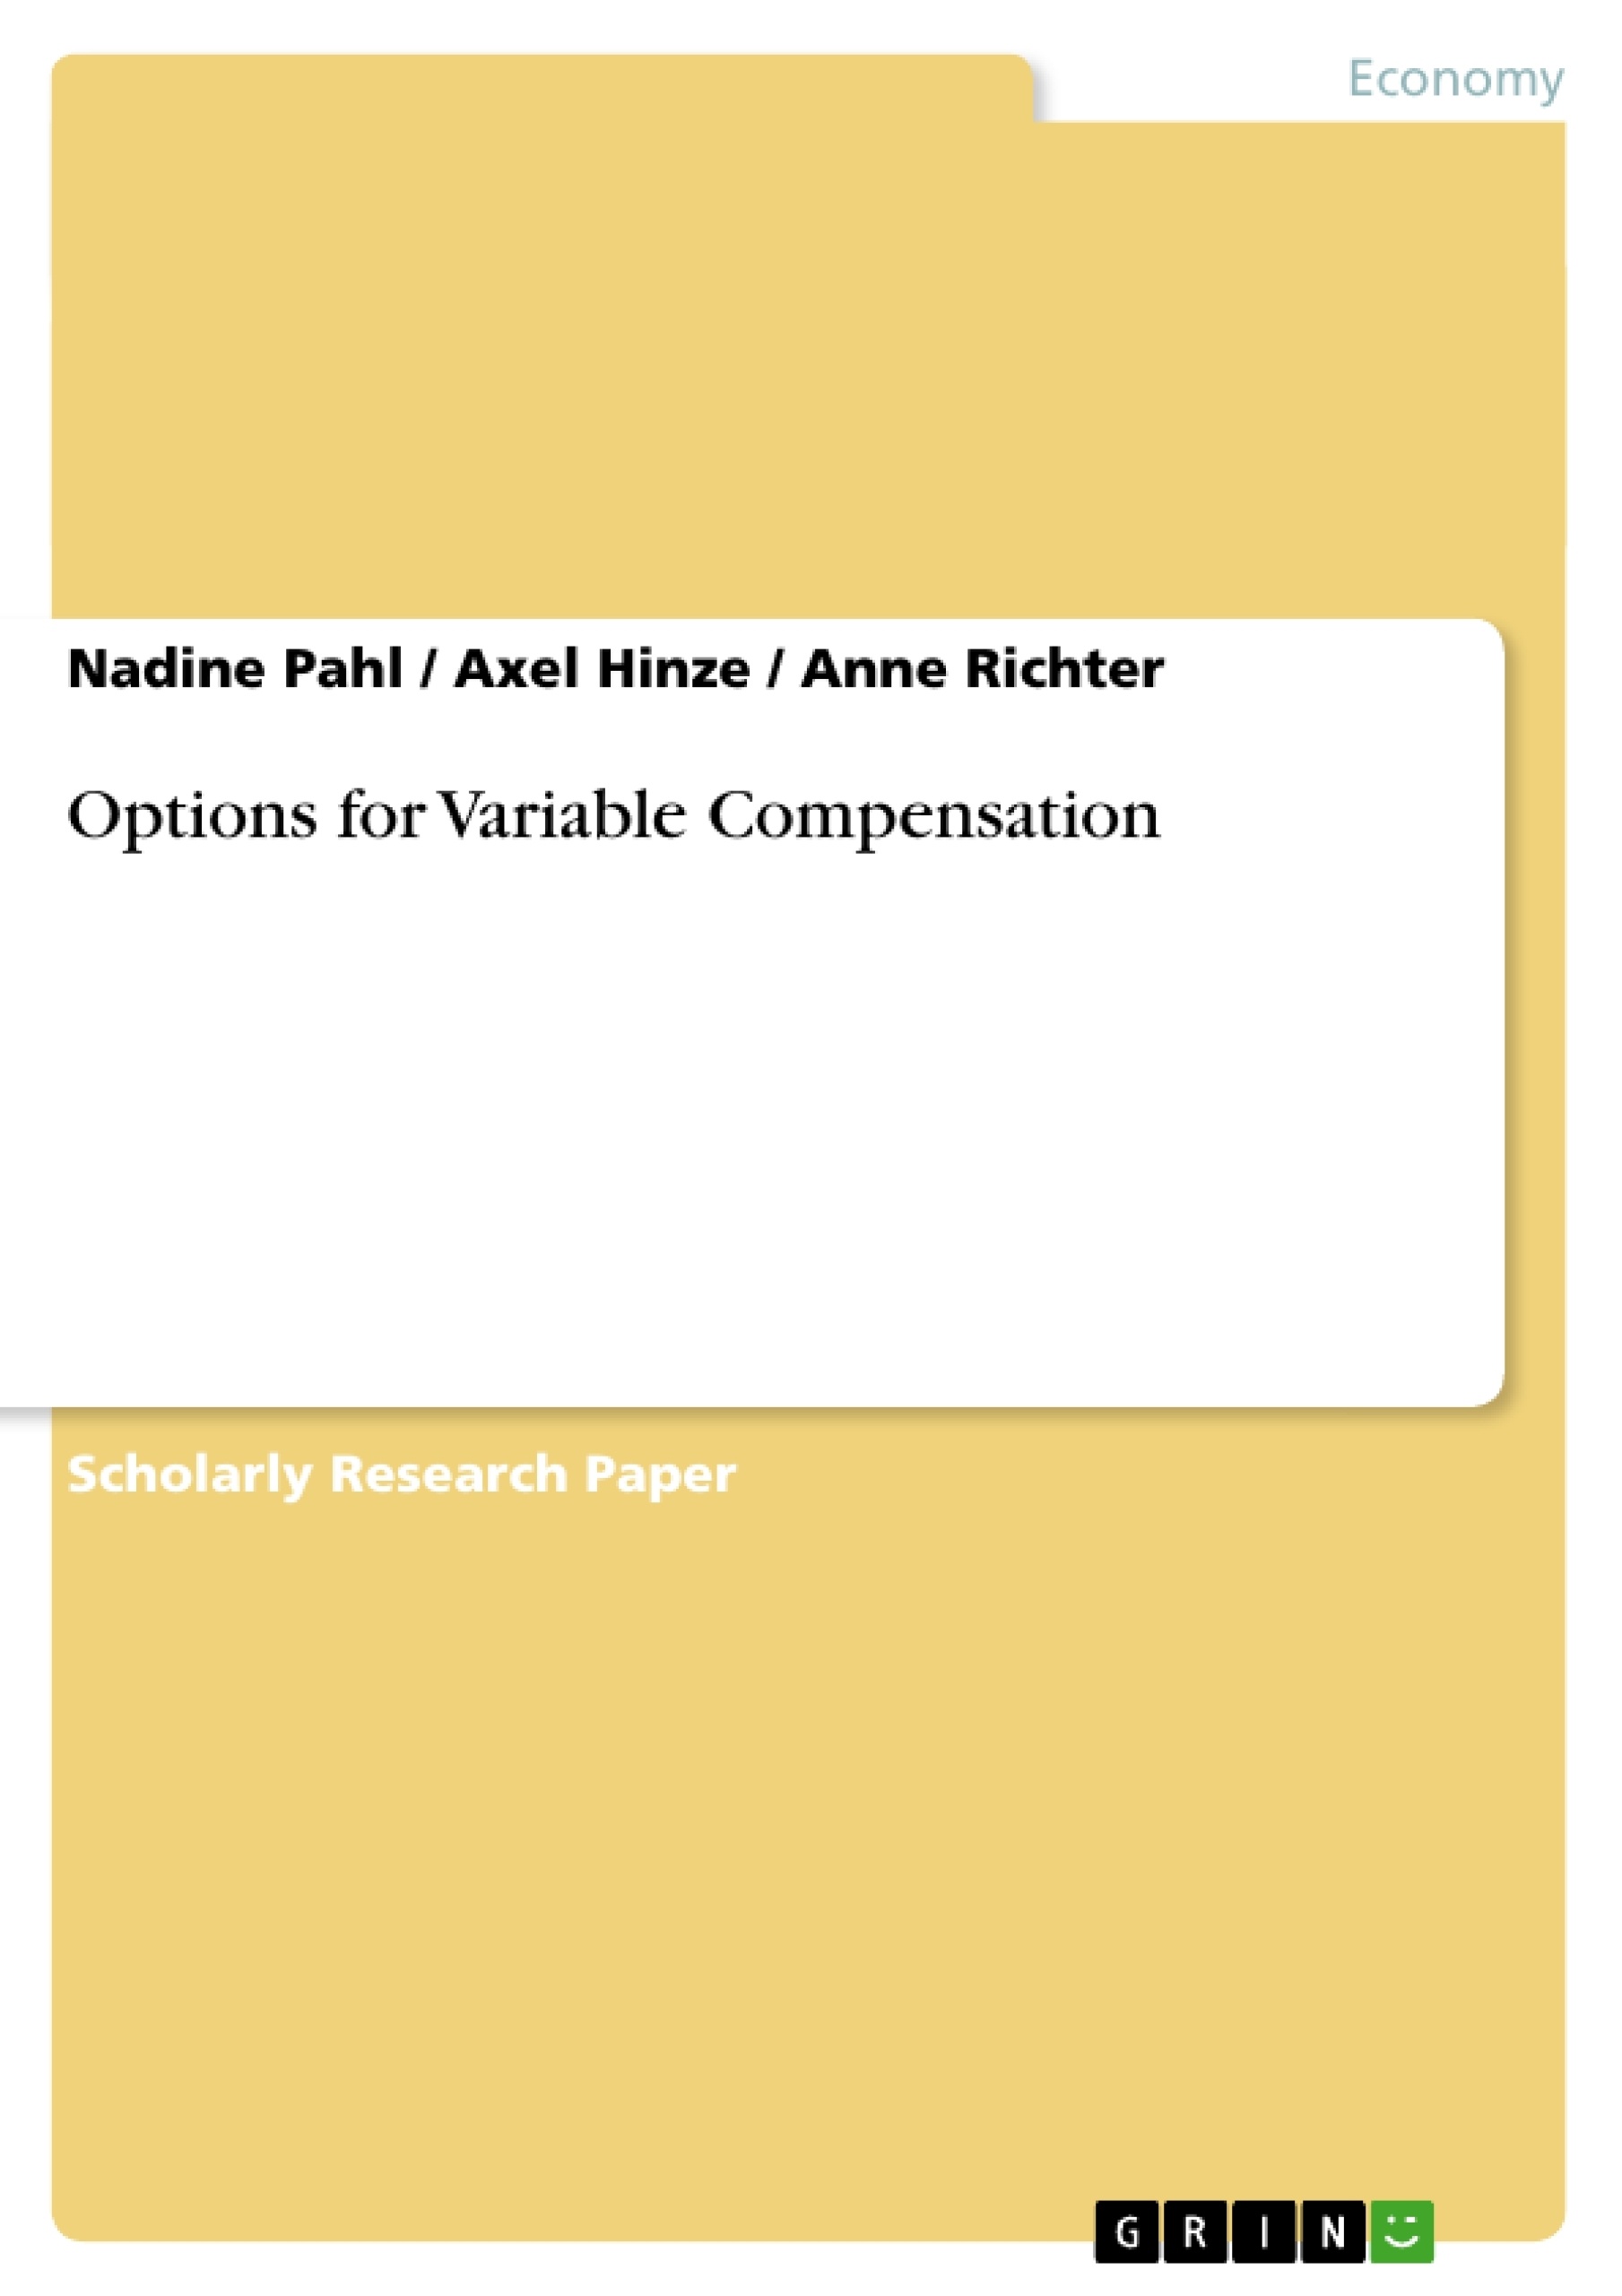 Title: Options for Variable Compensation